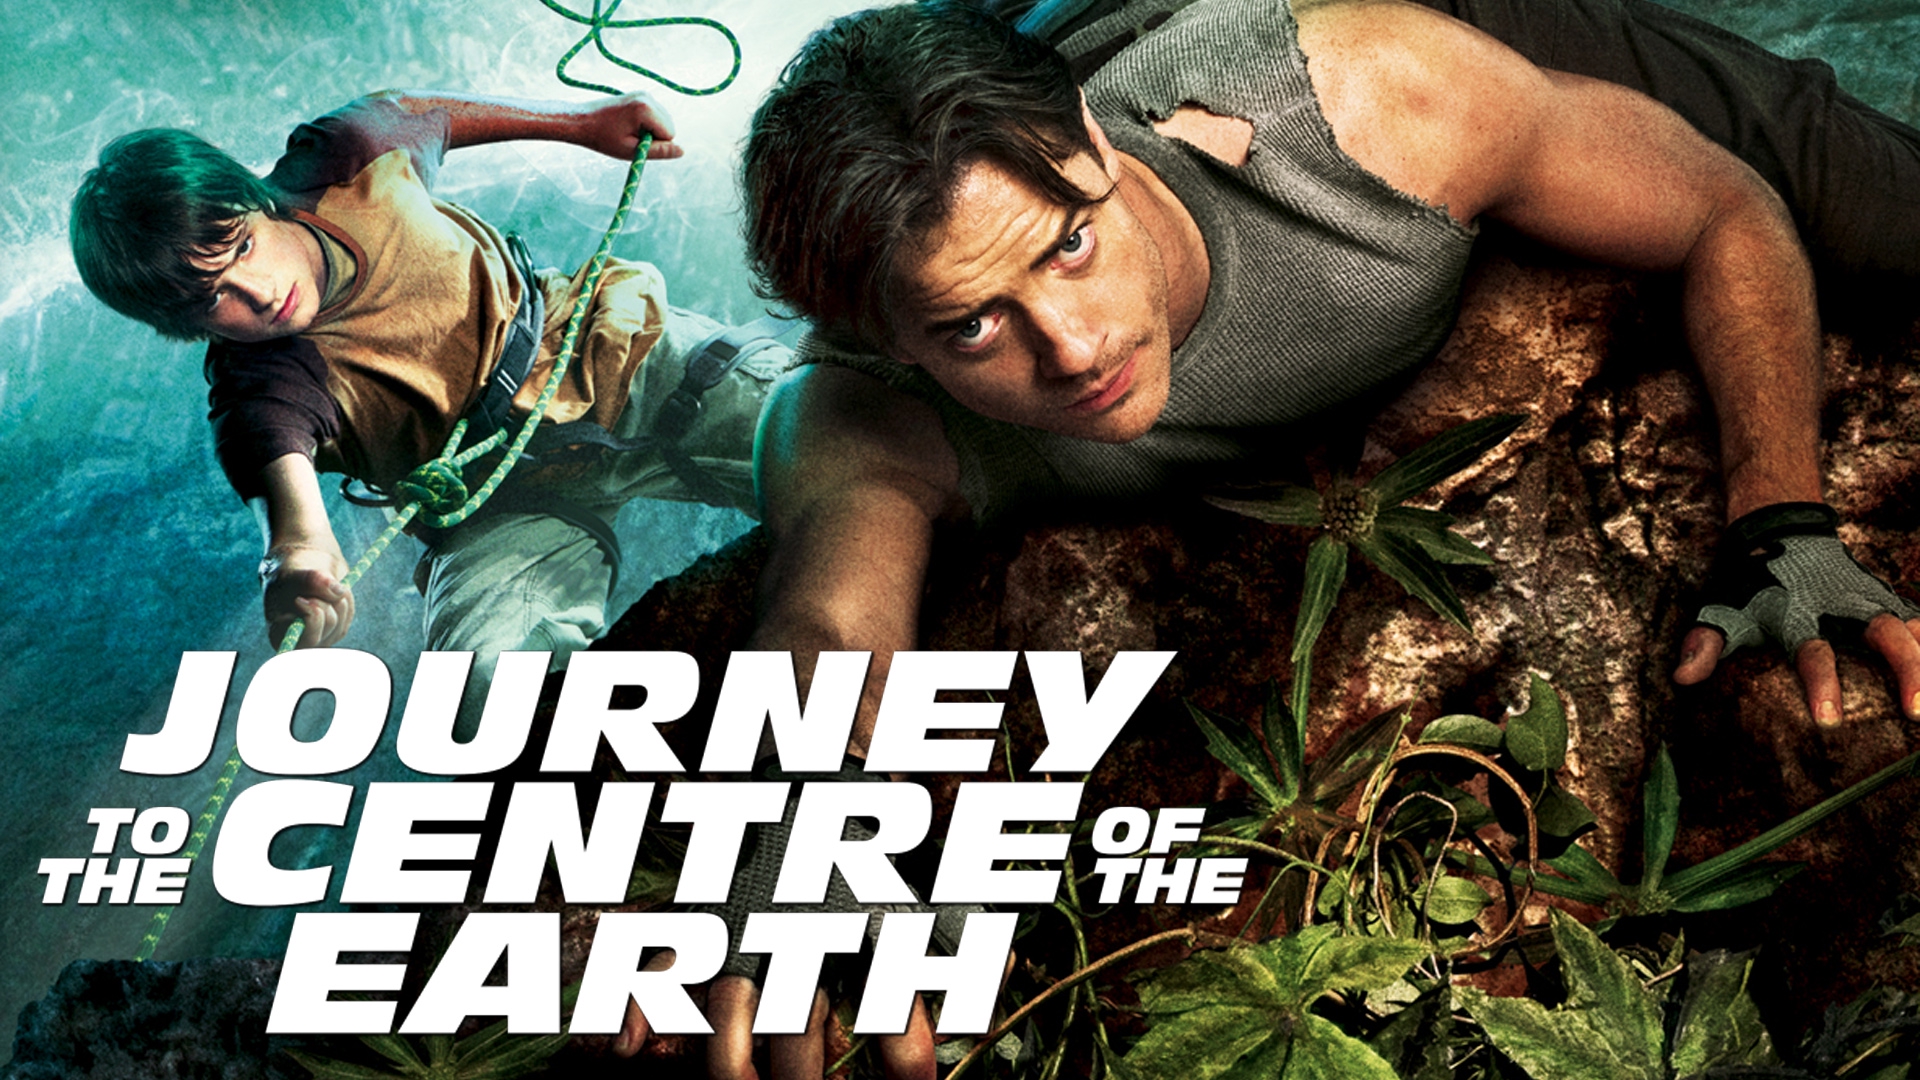 tamil dubbed movie journey to the center of the earth